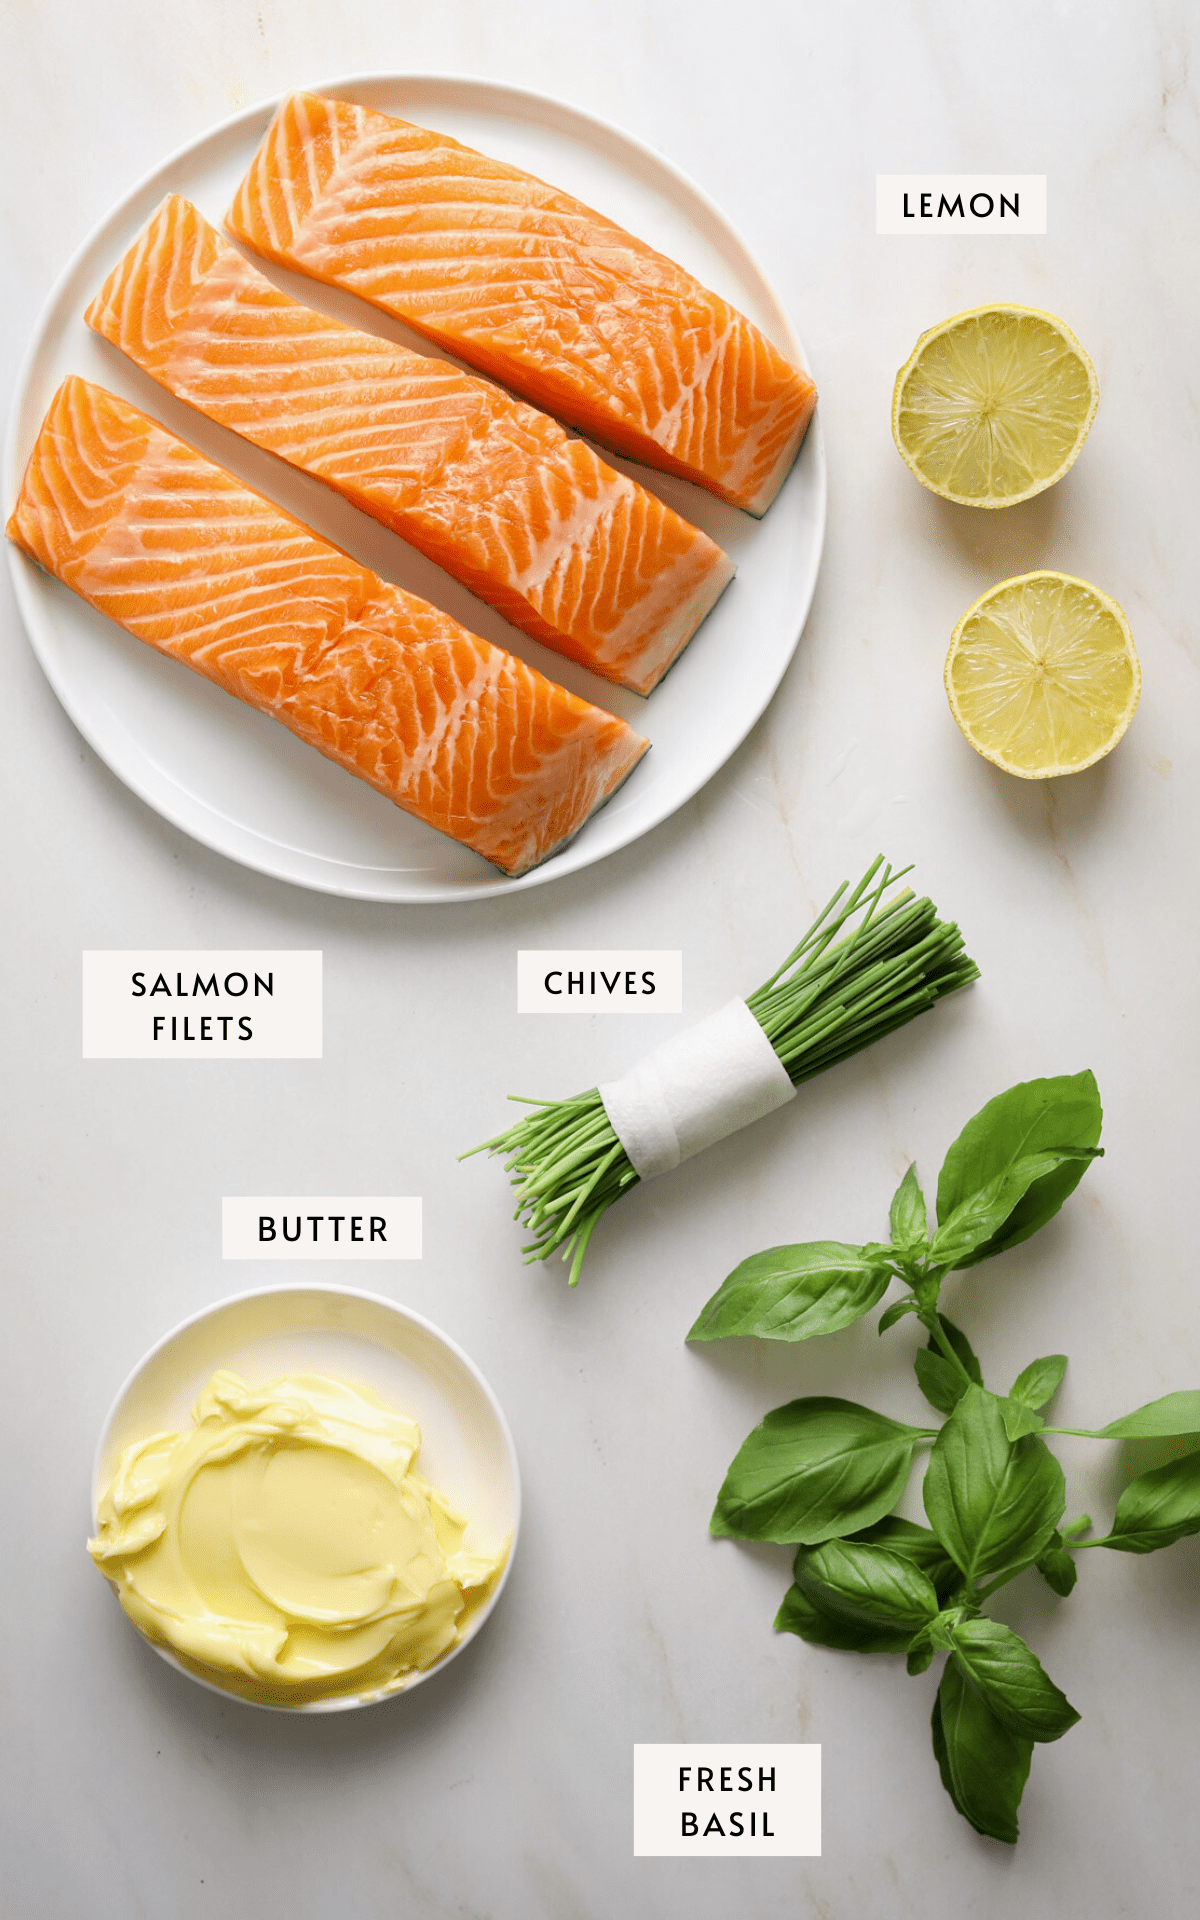 A white plate with three raw salmon filets, a halved lemon, a bundle of chives, a pile of fresh basil leaves and a small white plate of butter.